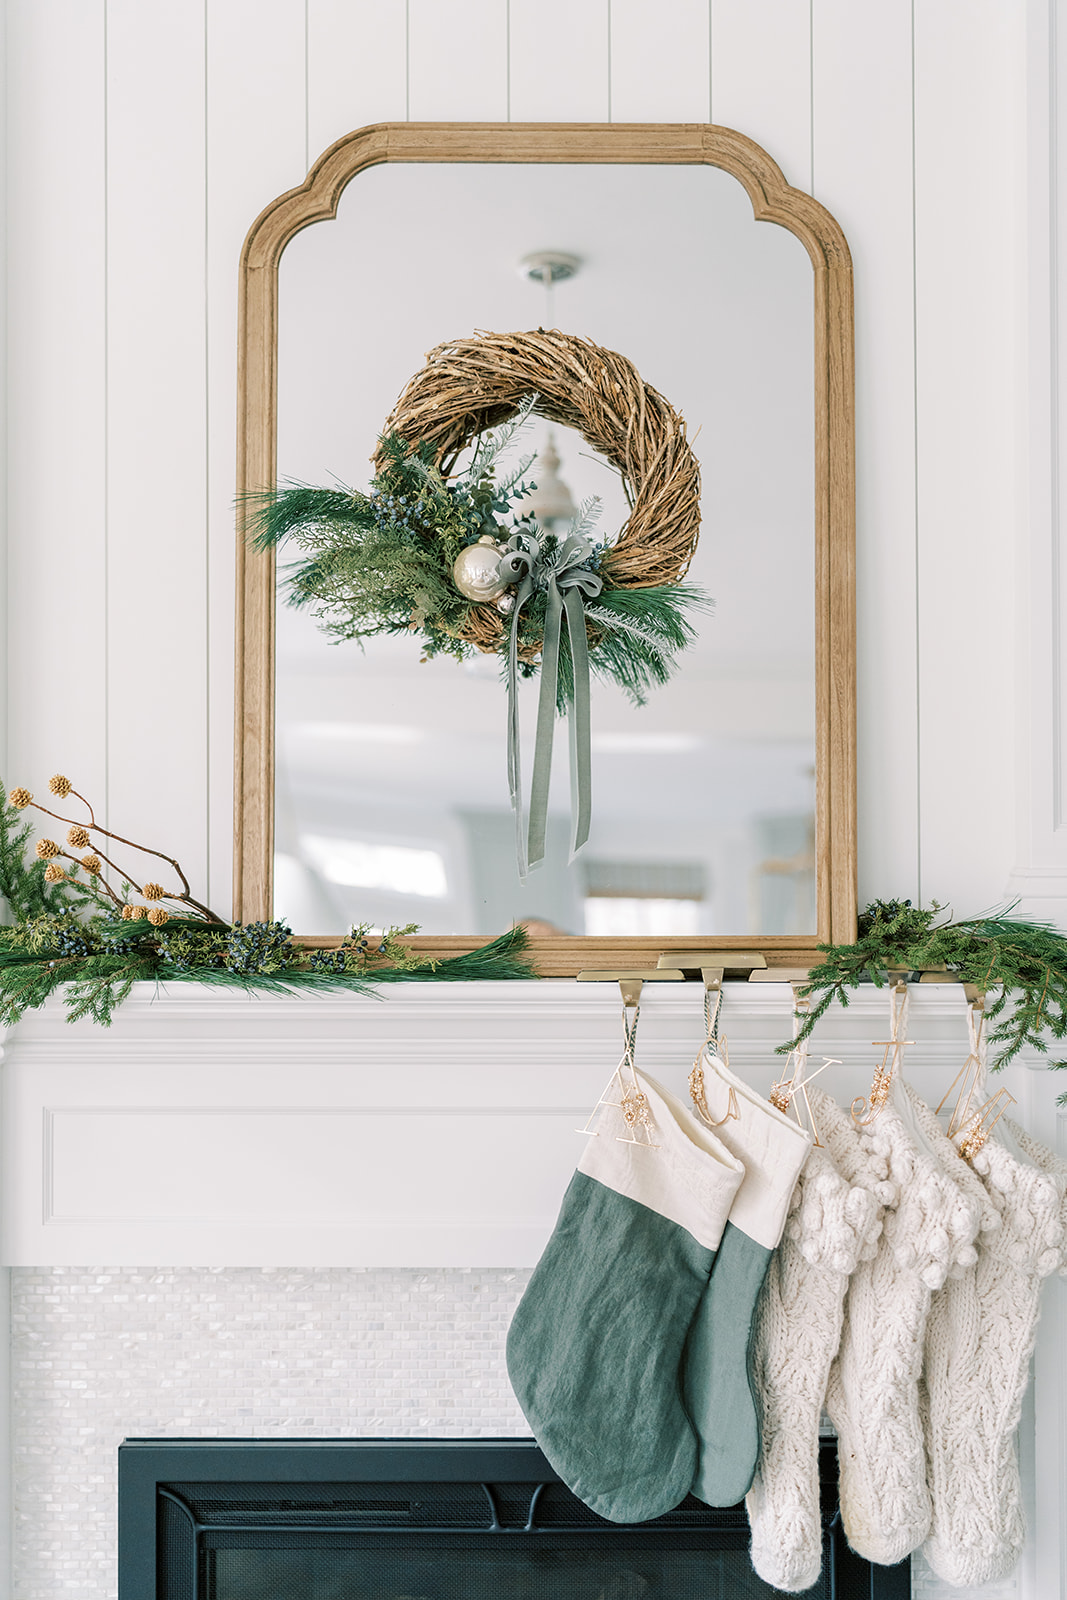 How to Decorate With Gold and Blue for Christmas - Sanctuary Home Decor